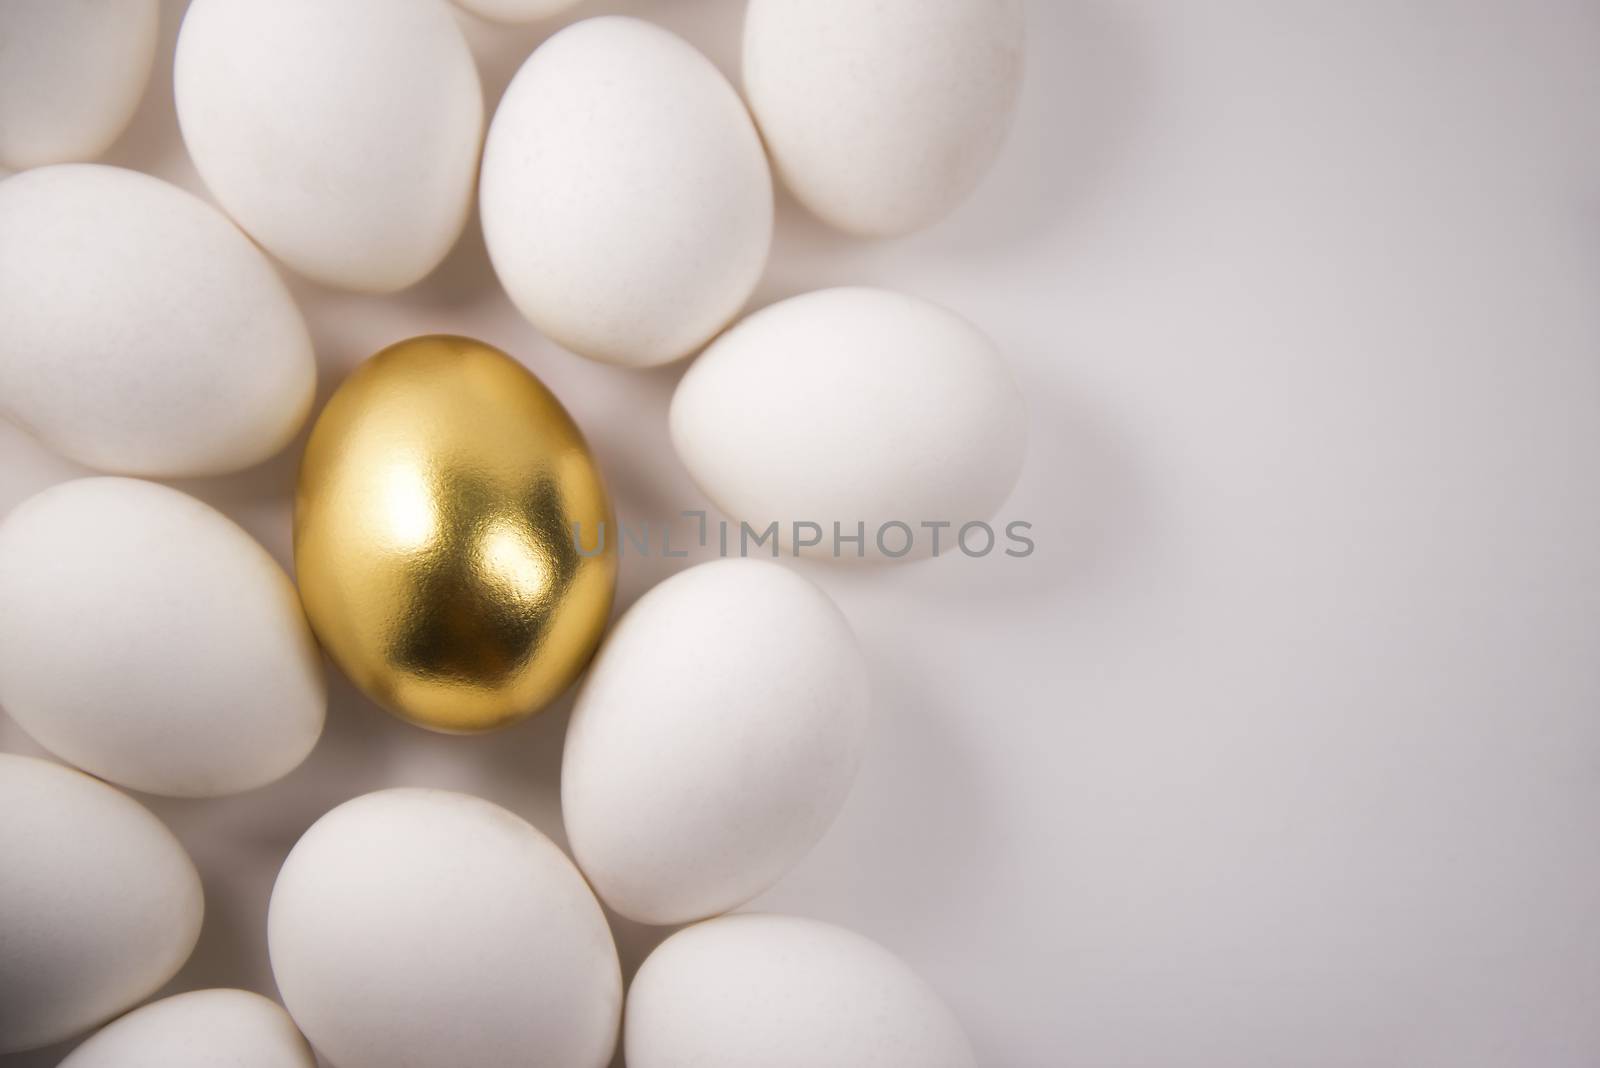 one gold egg lays among common white eggs